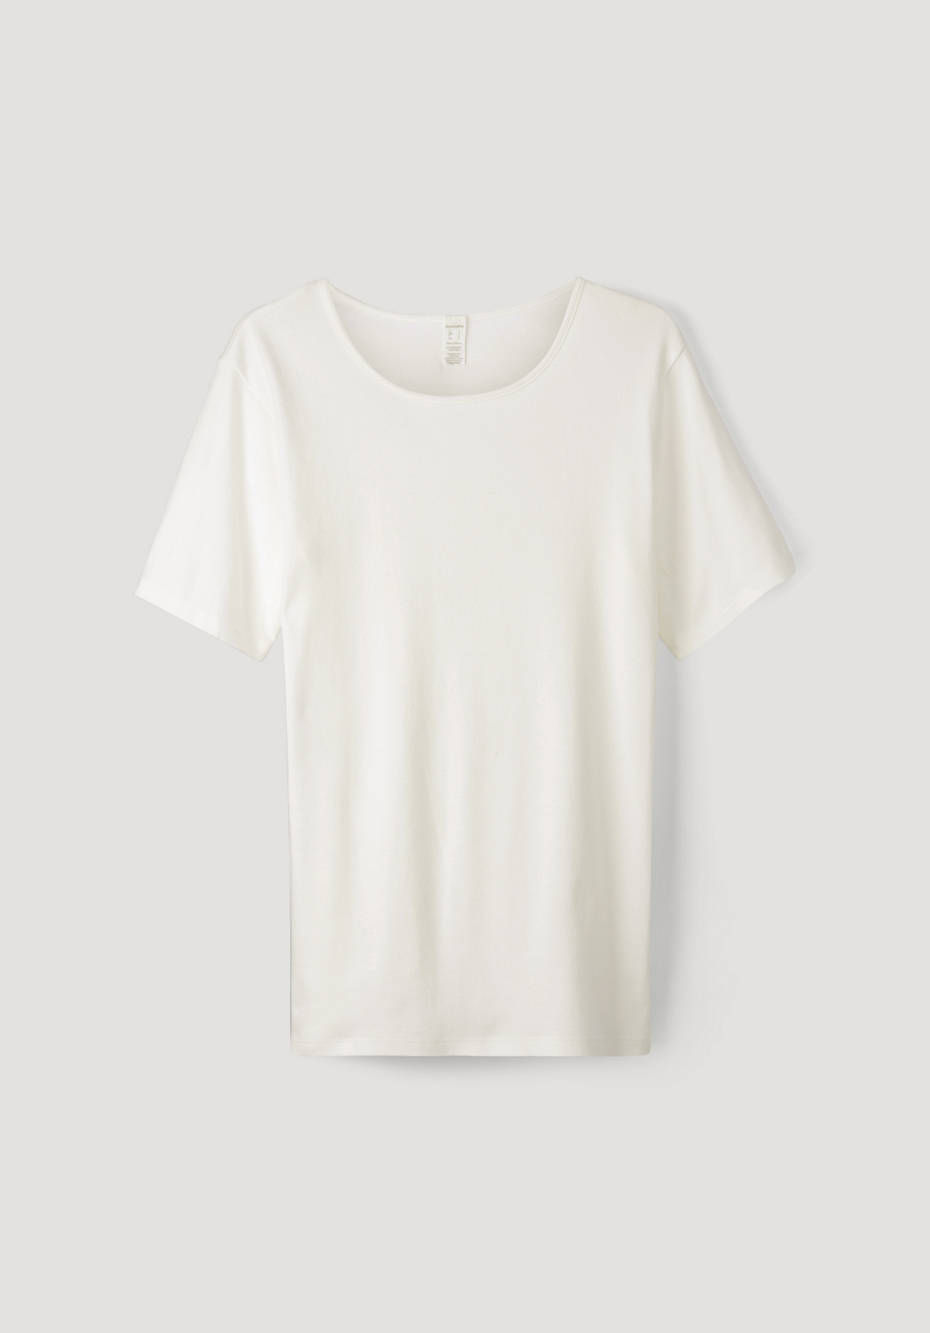 PureDAILY t-shirt in a set of 2 made of pure organic cotton